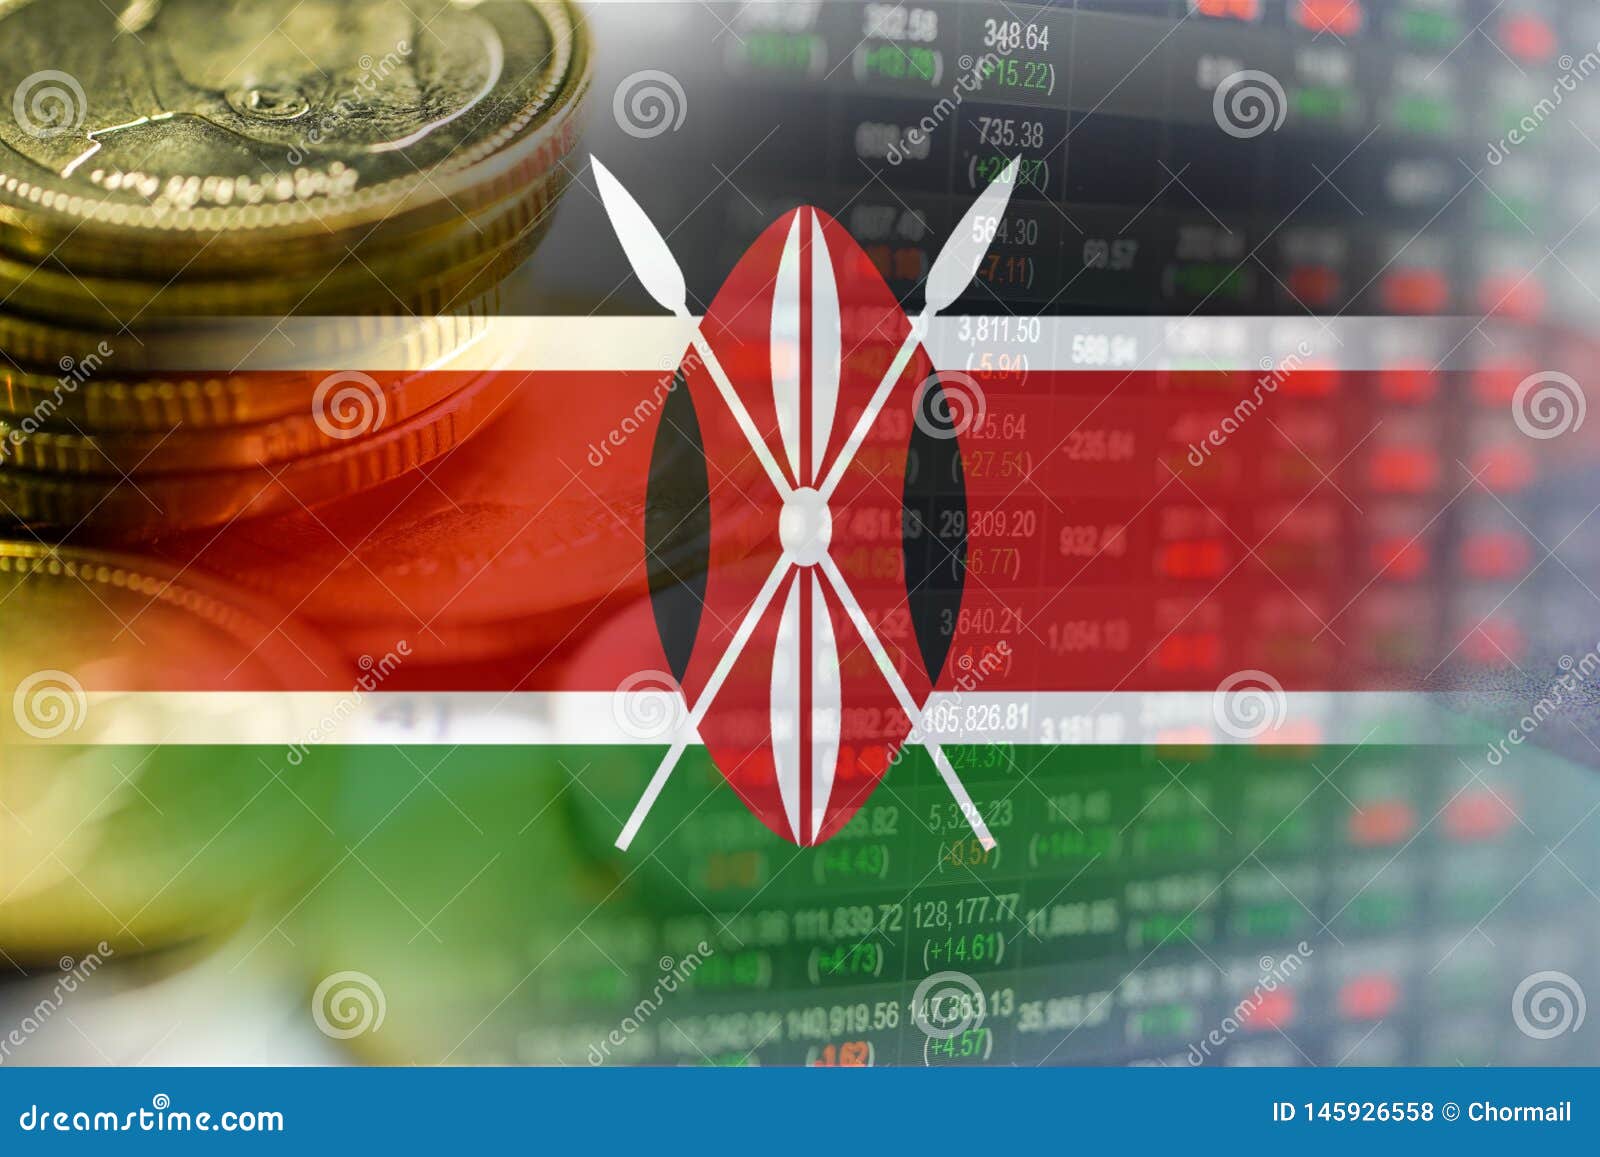 How to invest in forex in kenya